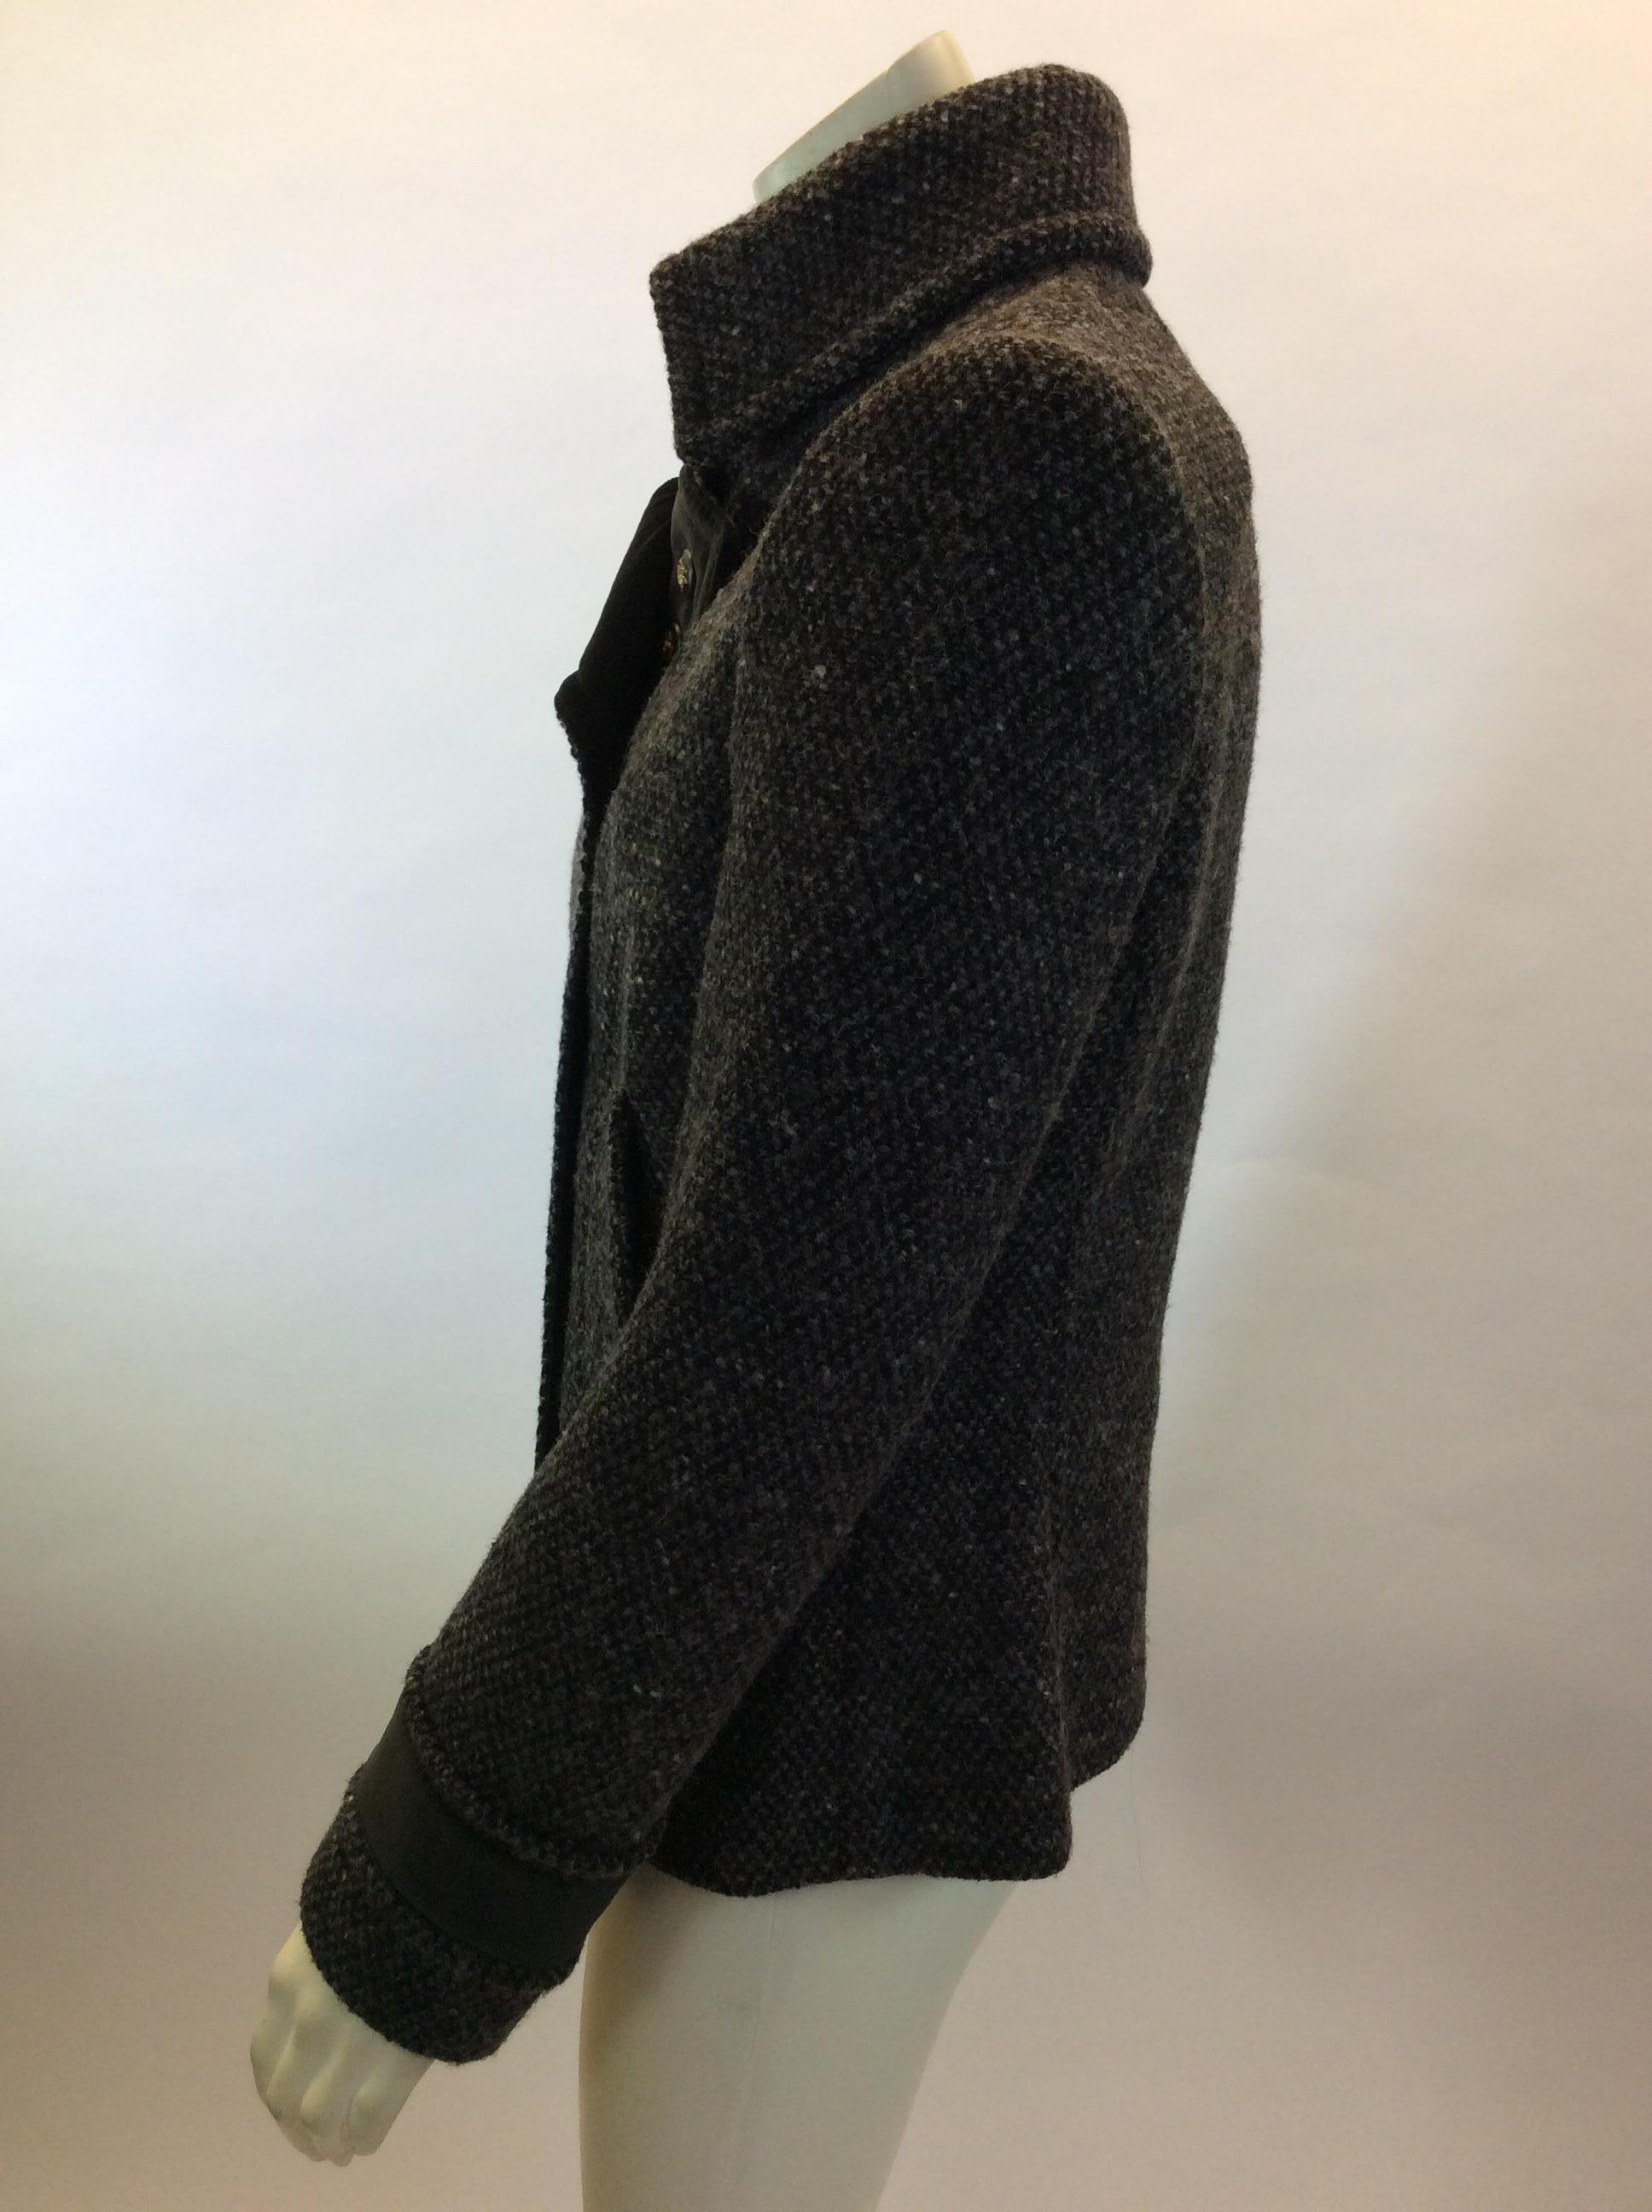 Dolce & Gabbana Grey Tweed Jacket
$299
Made in Italy
18% Cotton, 2% Spandex, 80% Wool
Size 40
Length 24